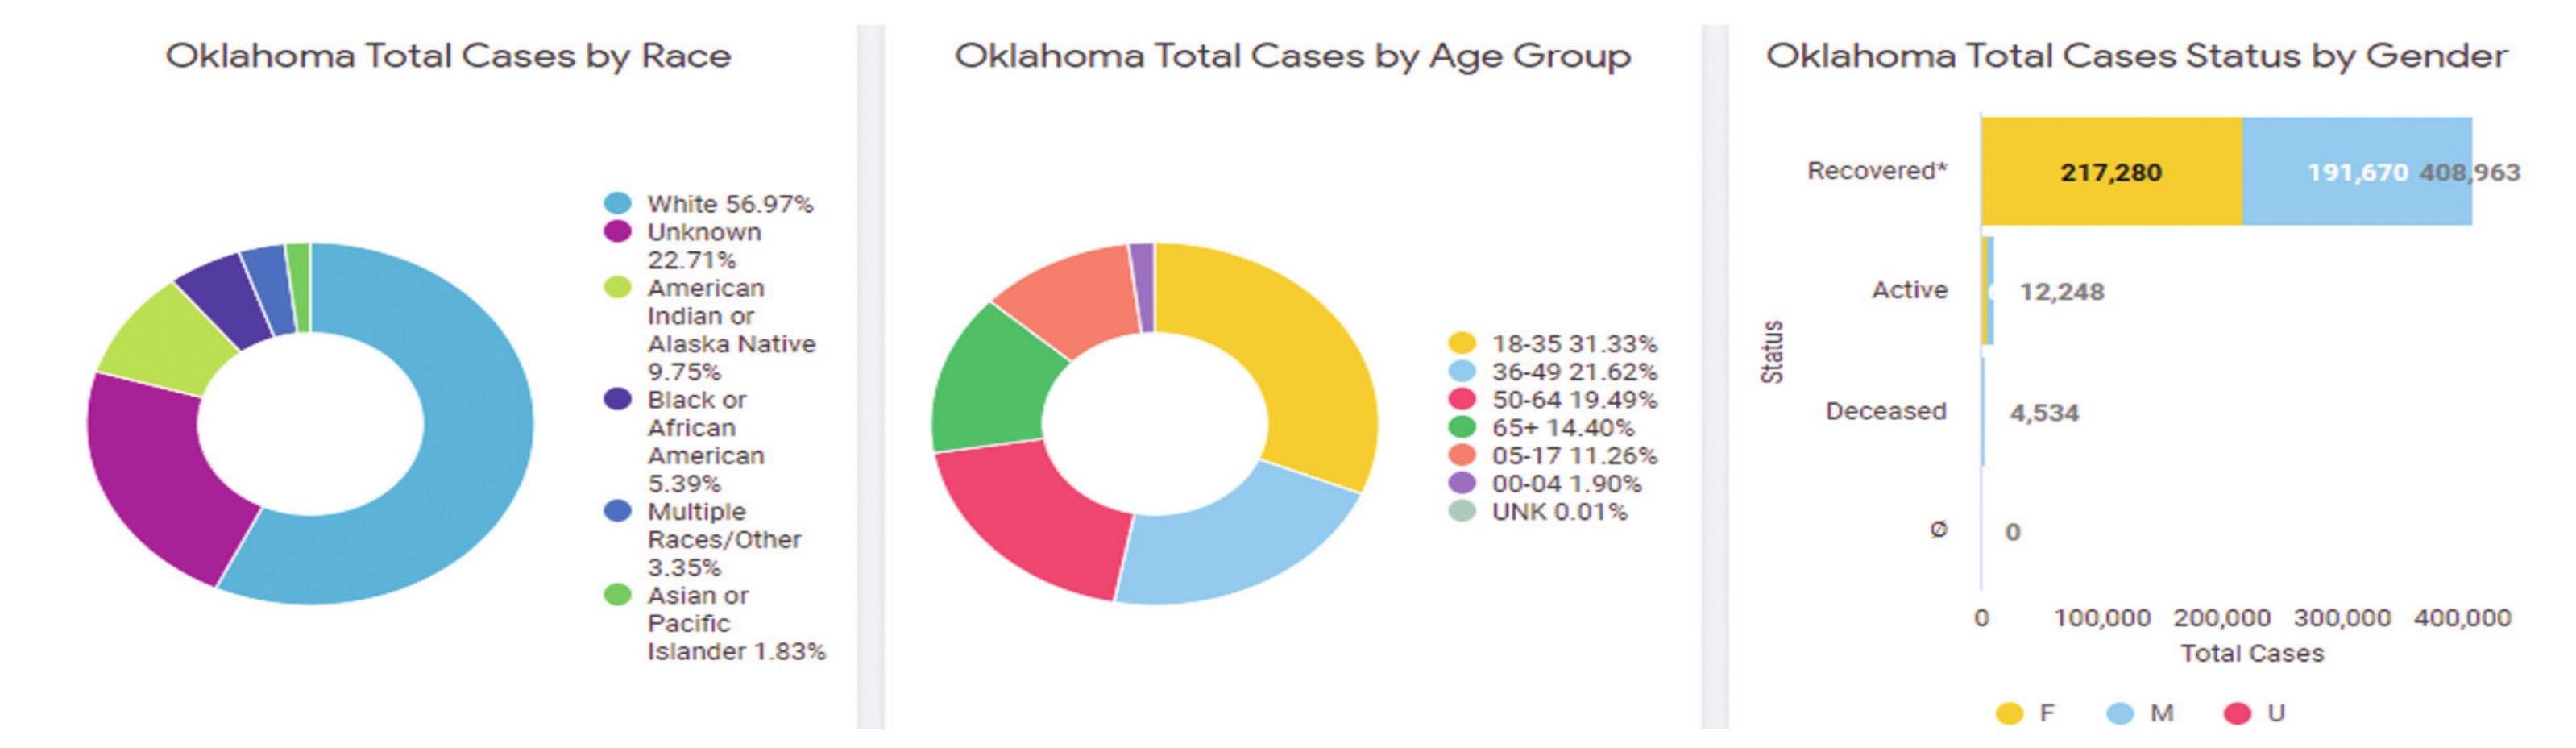 OSDH reports 29 cases in Weatherford